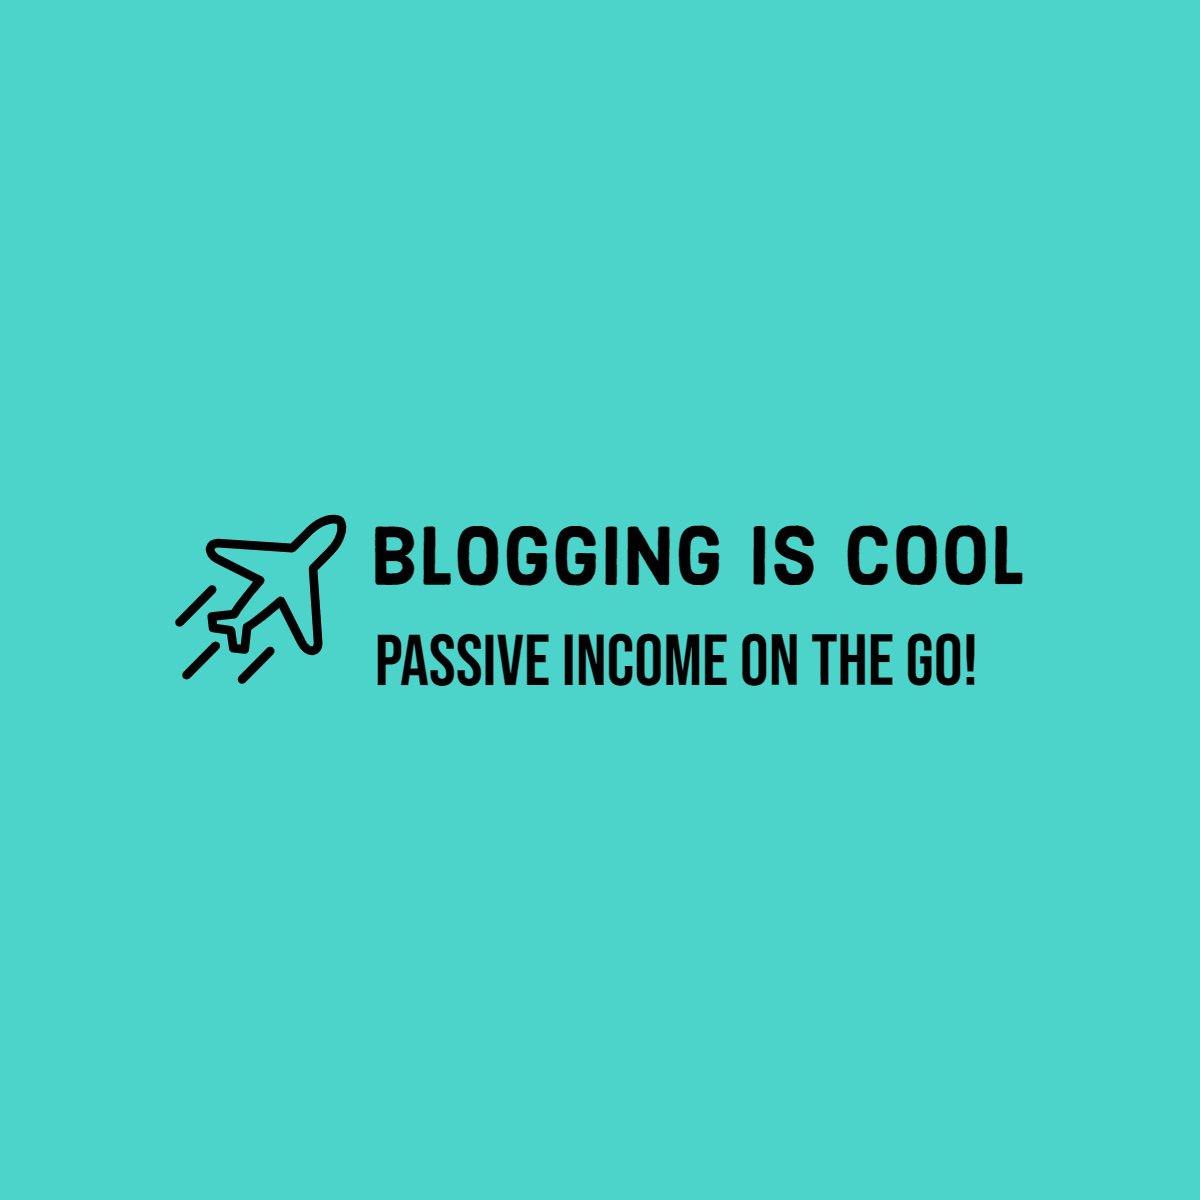 Bloggingiscool.com is about improving blogs by teaching bloggers